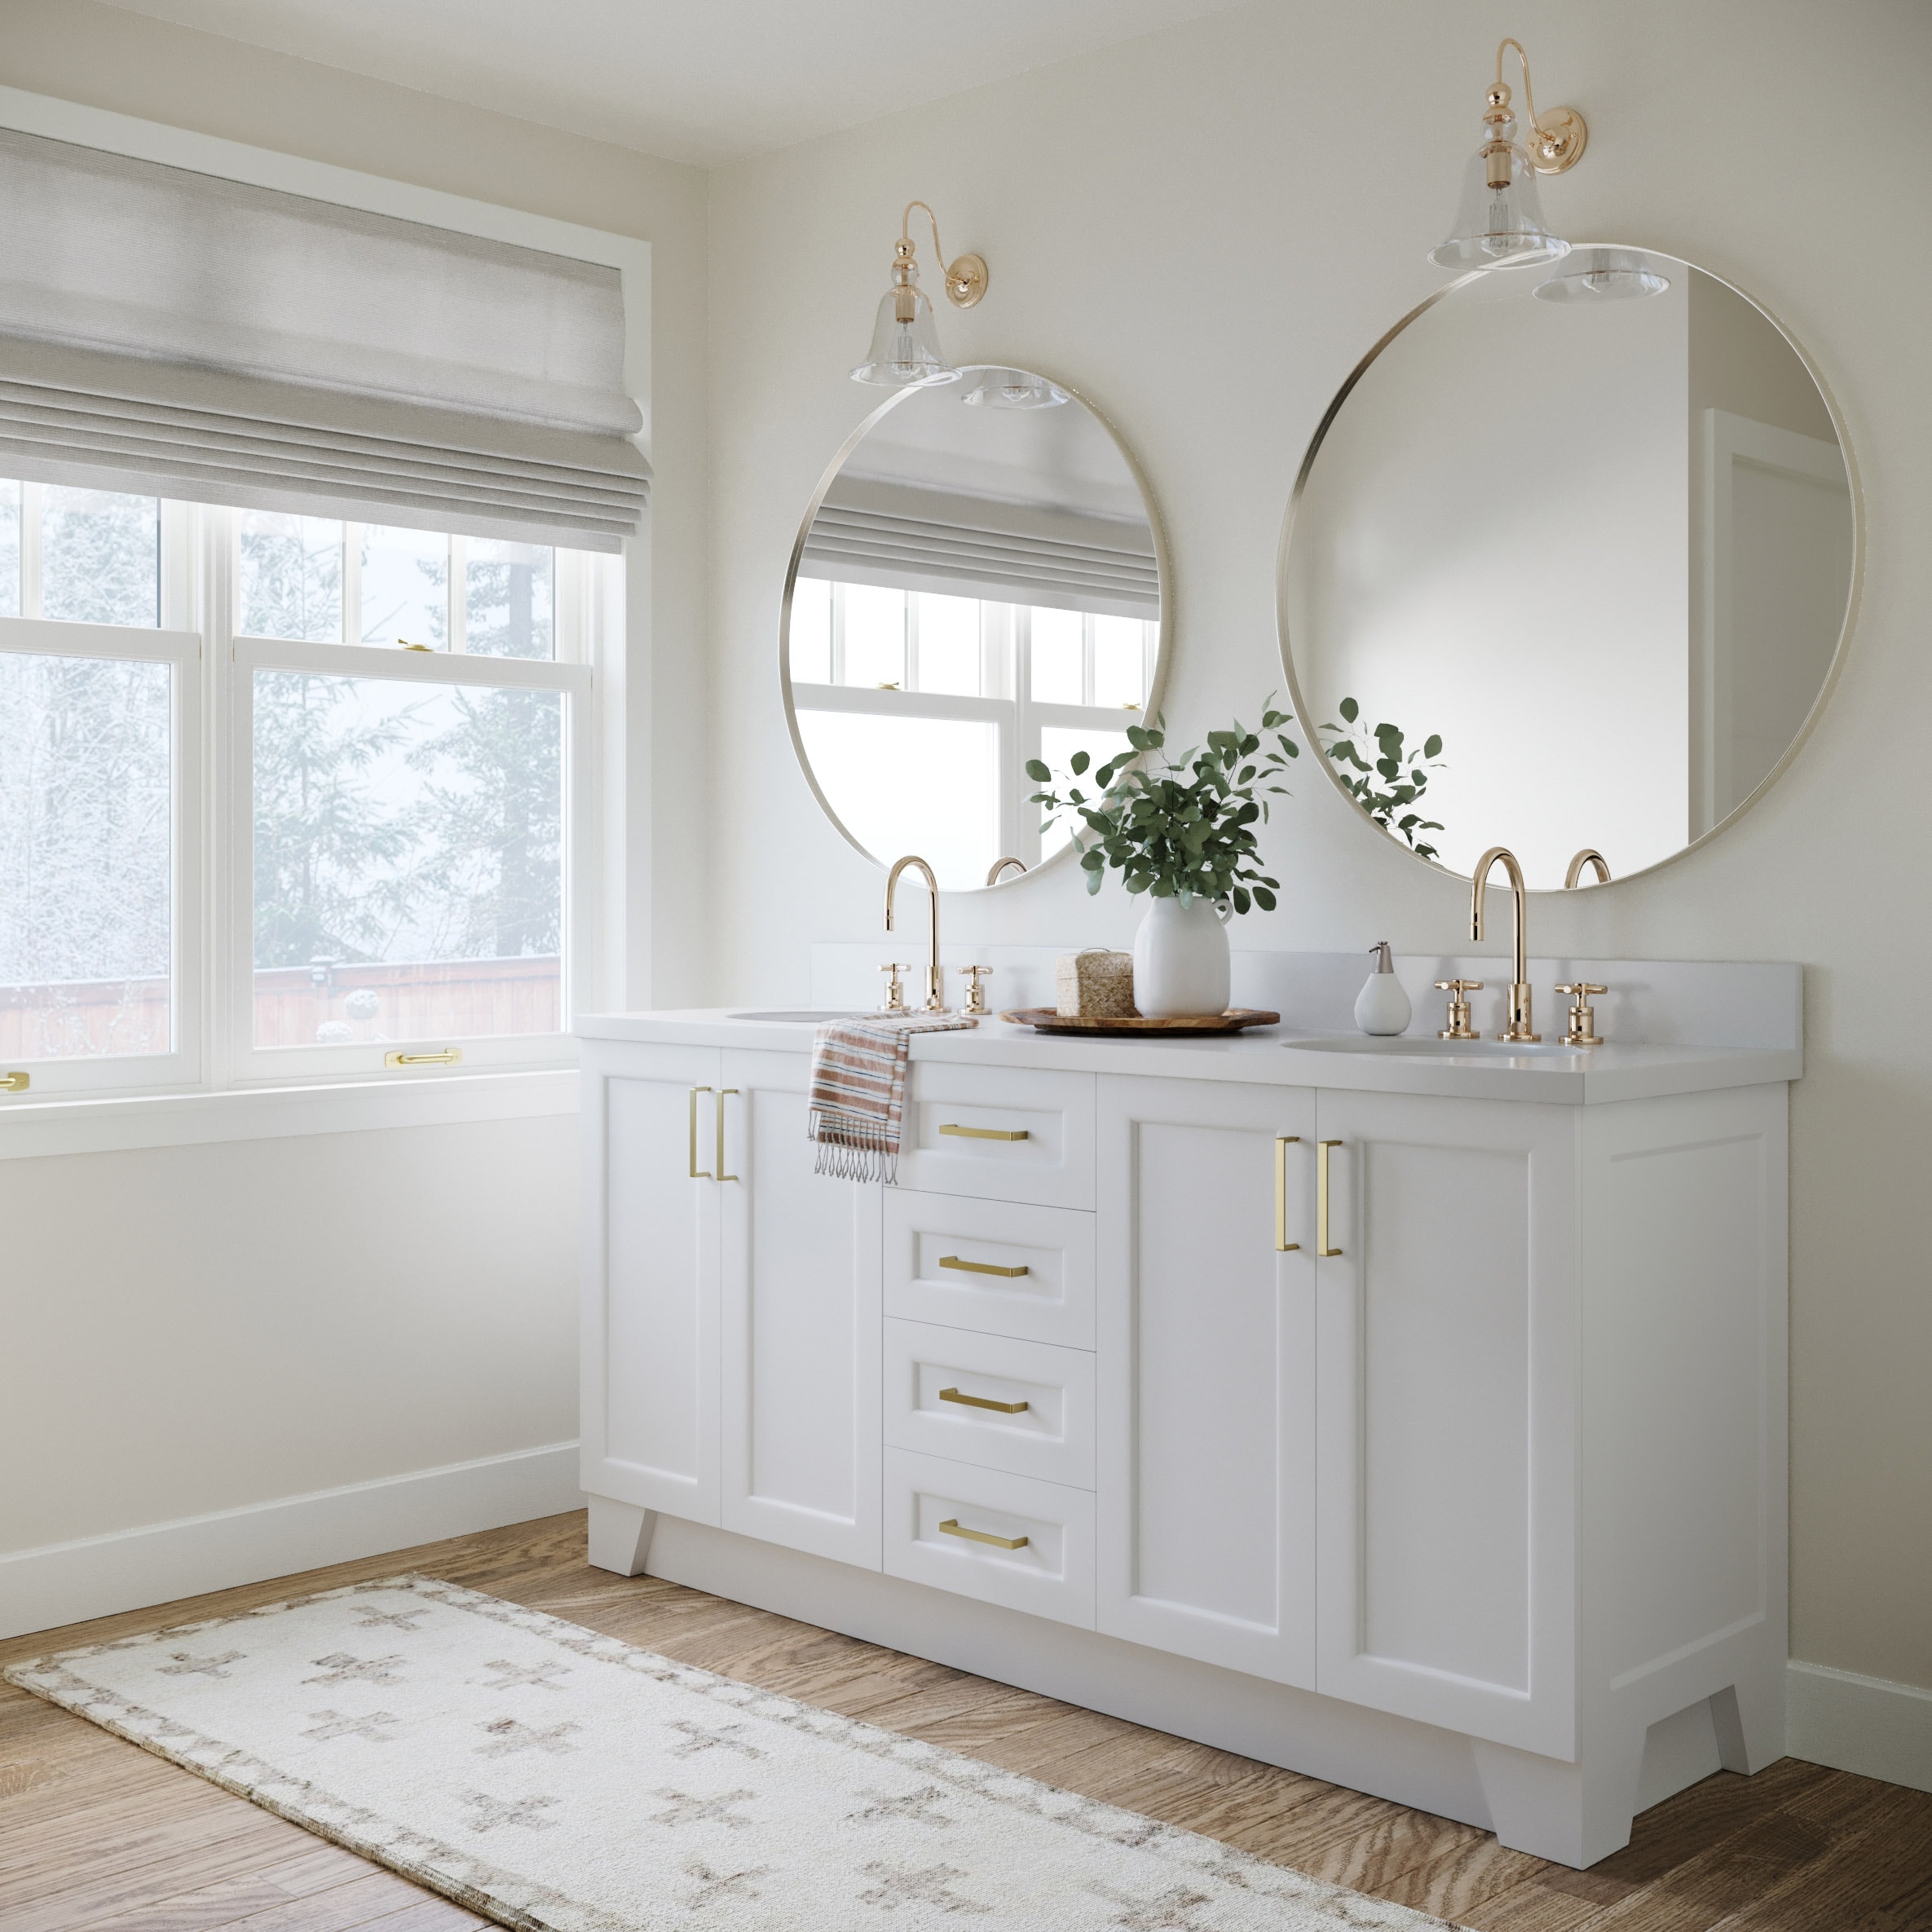 ARIEL Taylor 73-in White Undermount Double Sink Bathroom Vanity with ...